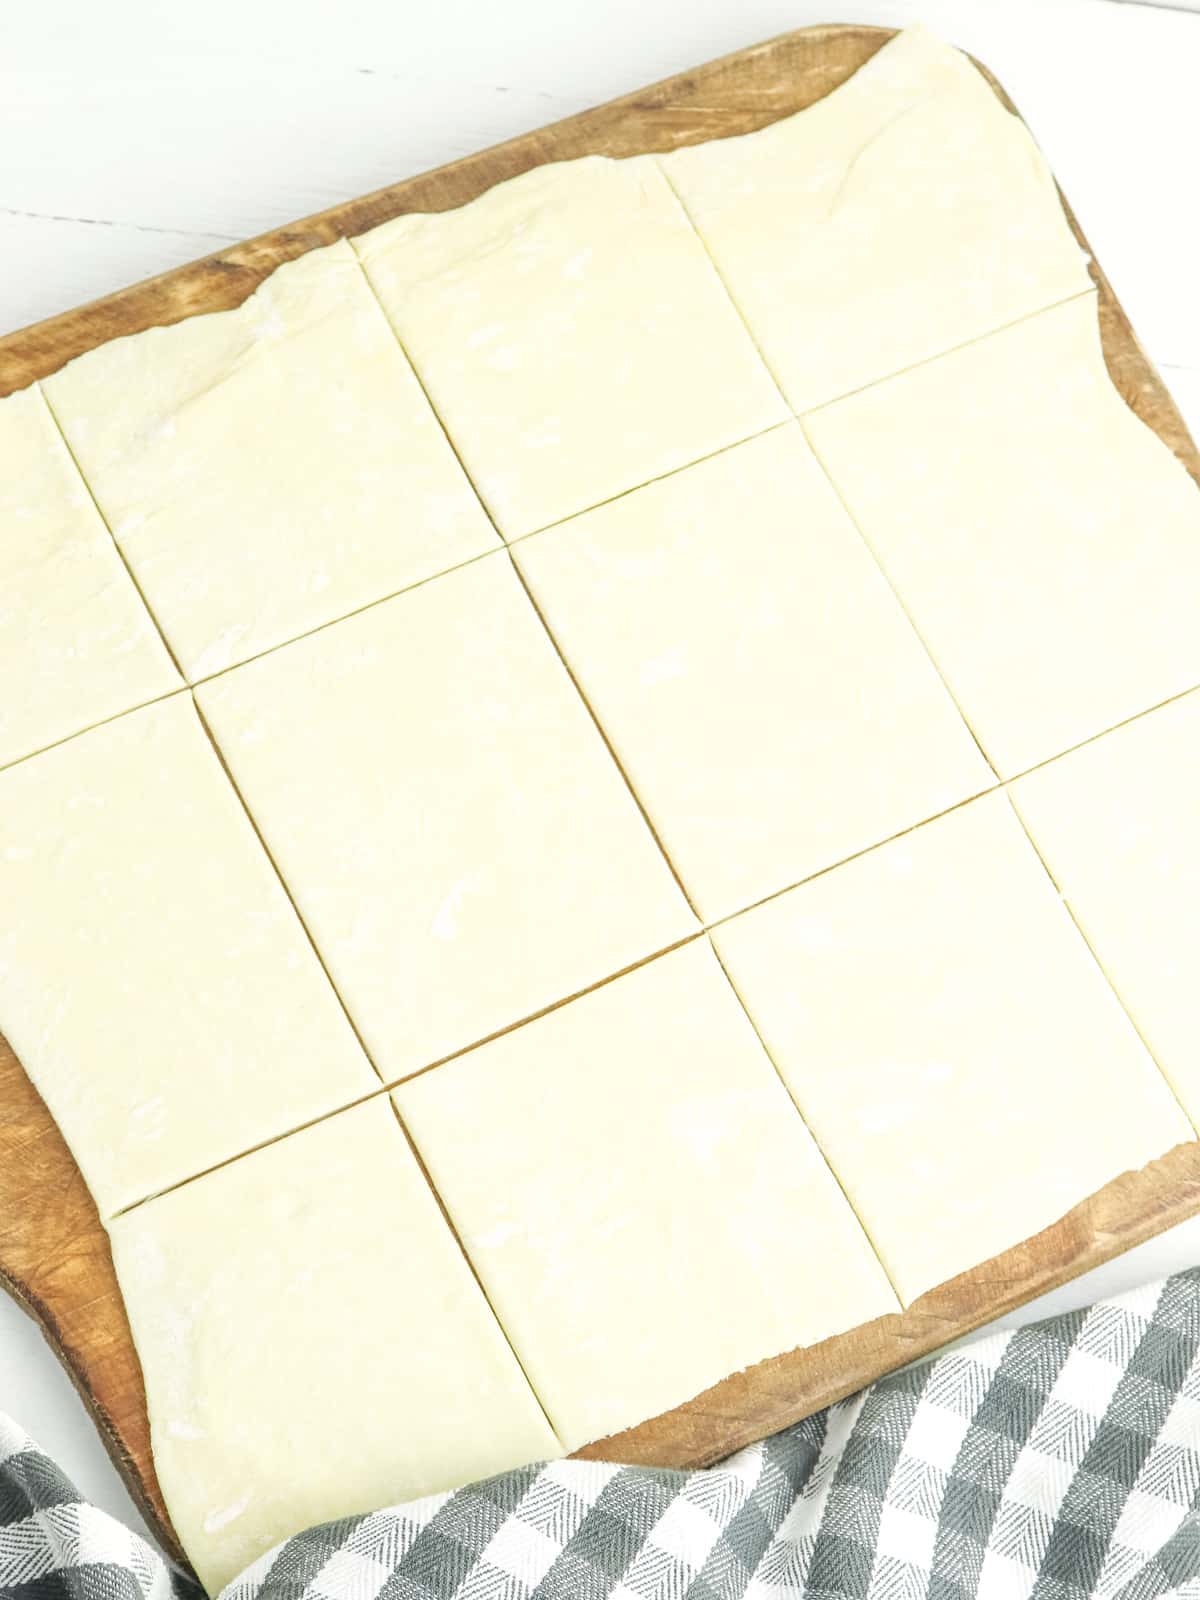 slice pastry sheets into 12 pieces